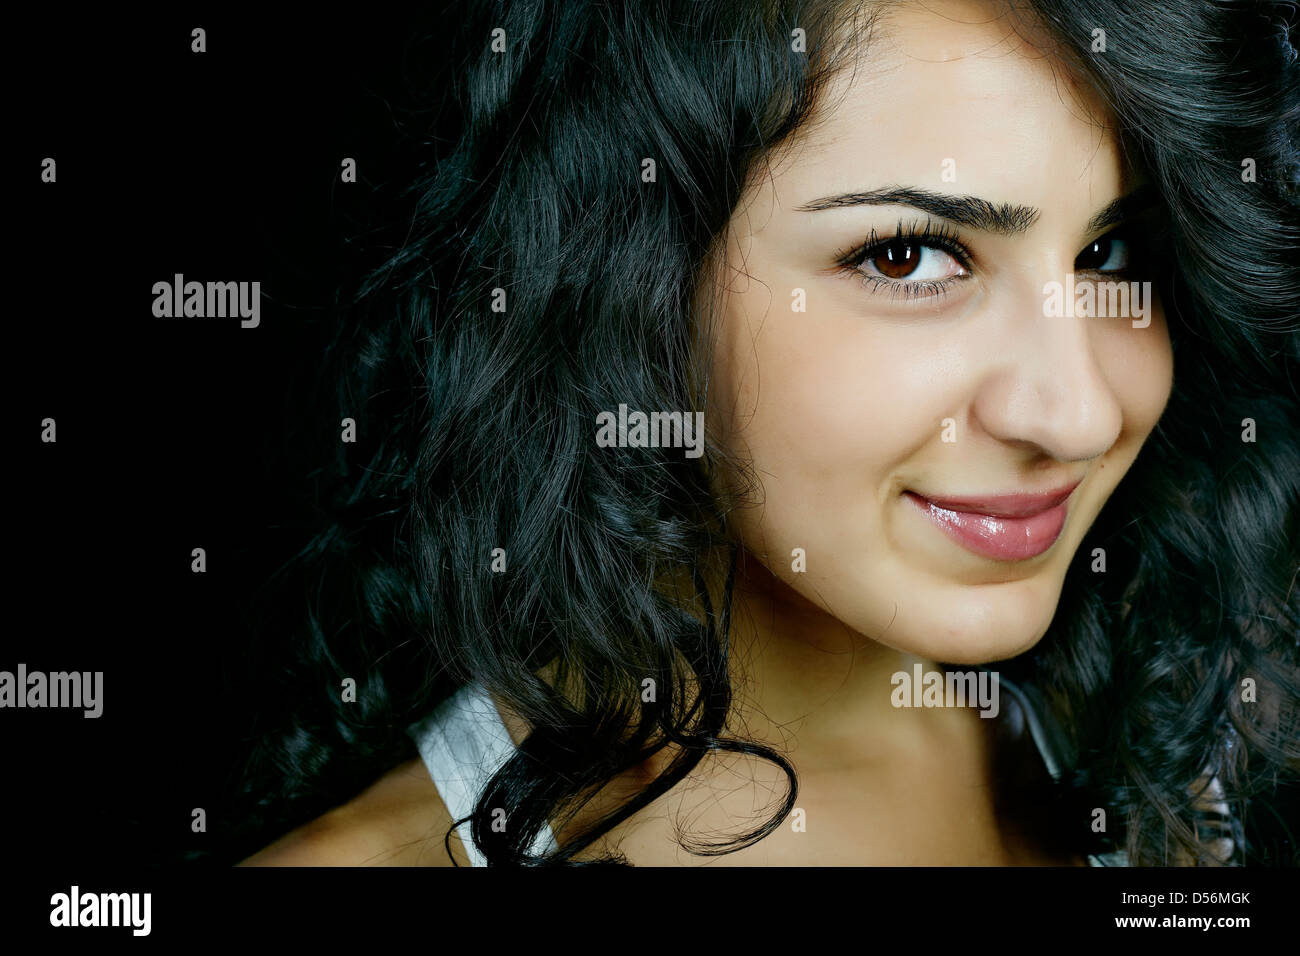 Middle Eastern woman smiling Banque D'Images